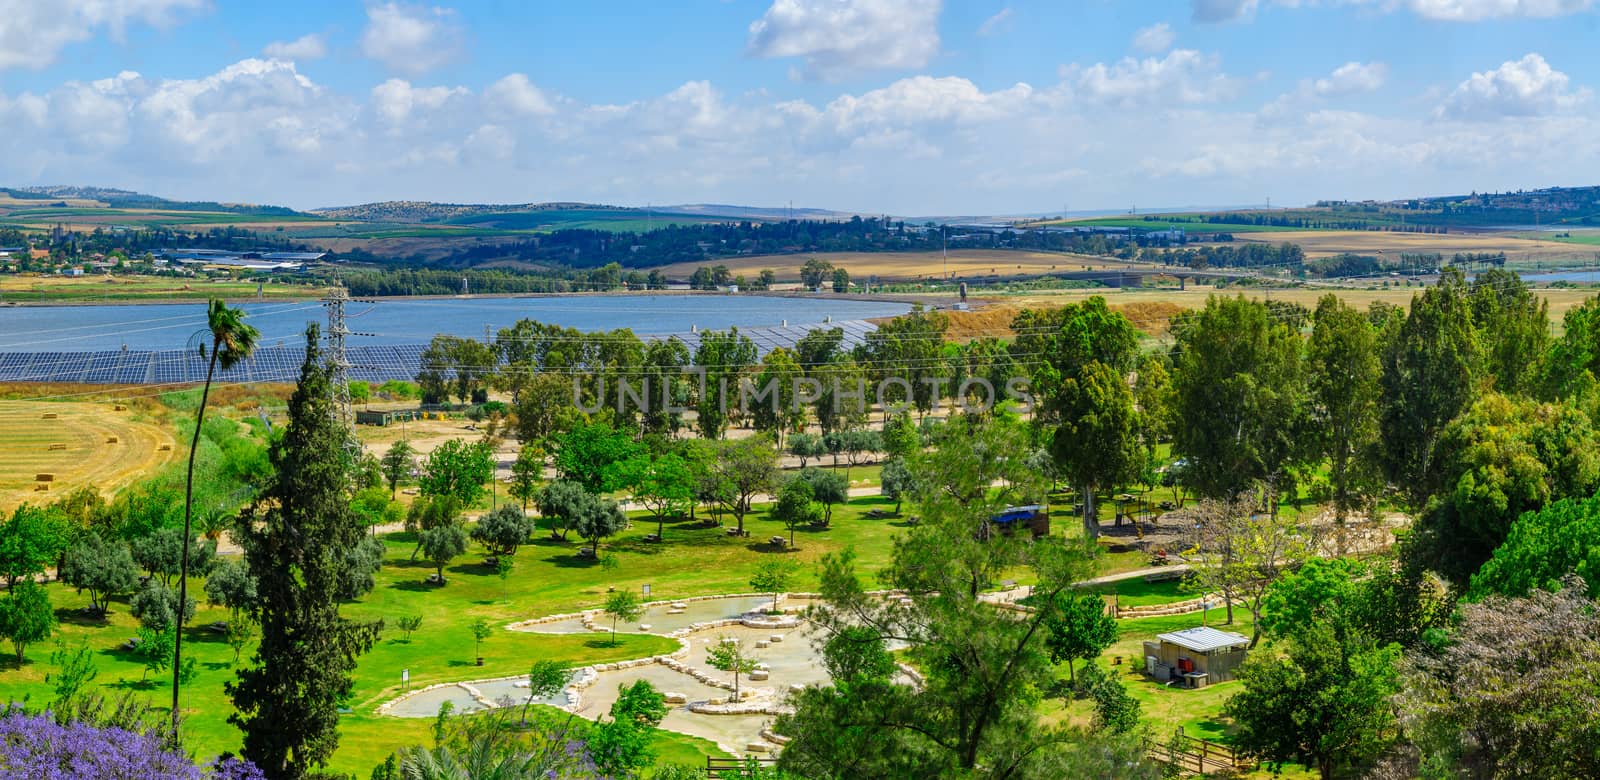 Panoramic landscape of Harod Valley and the Jezreel Valley by RnDmS